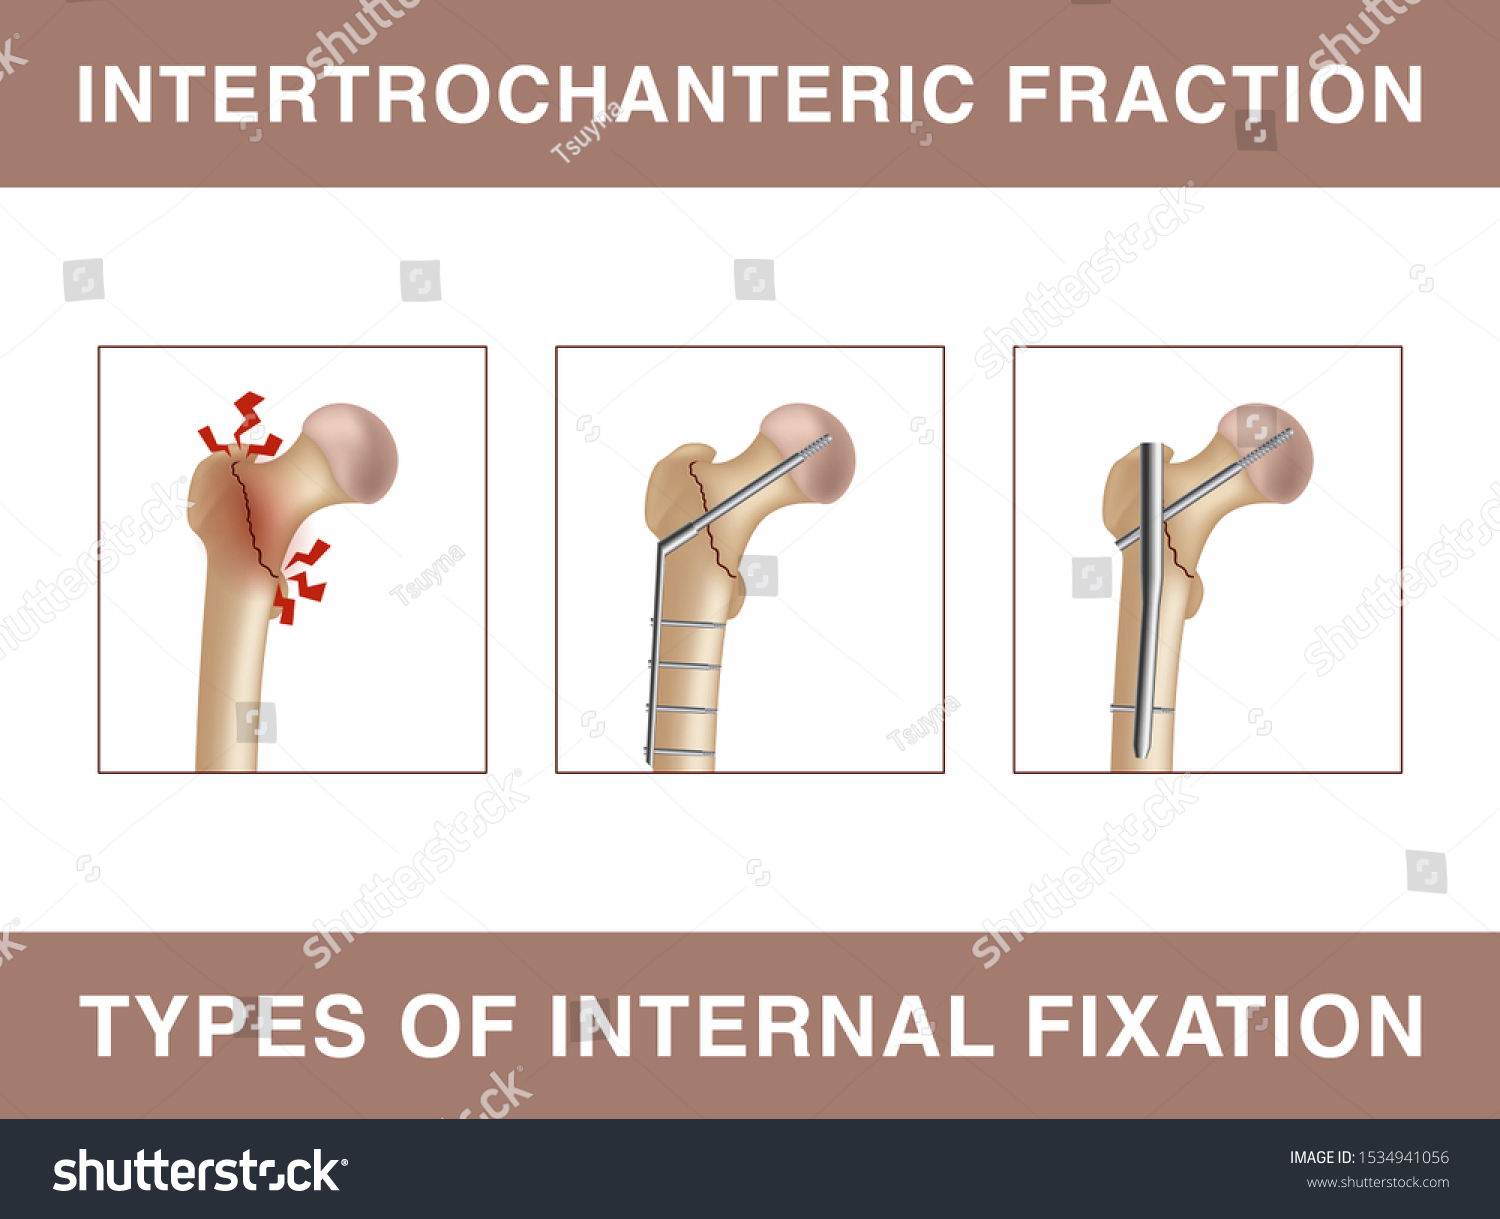 SVG of Intertrochanteric fracture. Types of internal fixation. Vector illustration showing the strengthening of the bone fracture using screws, rods, pins, or plates. svg